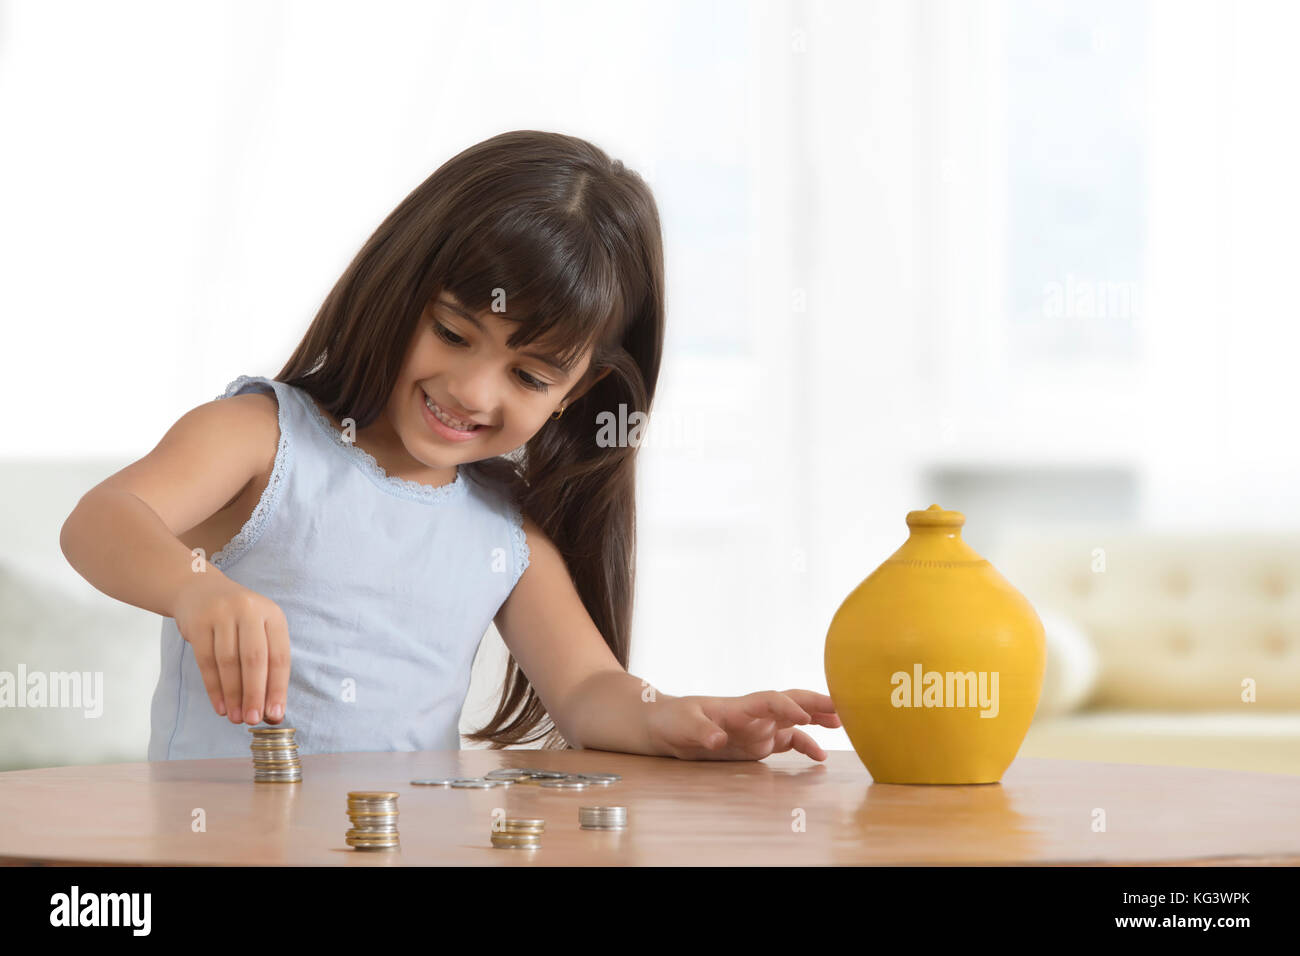 Smiling girl arranging coins on table Stock Photo